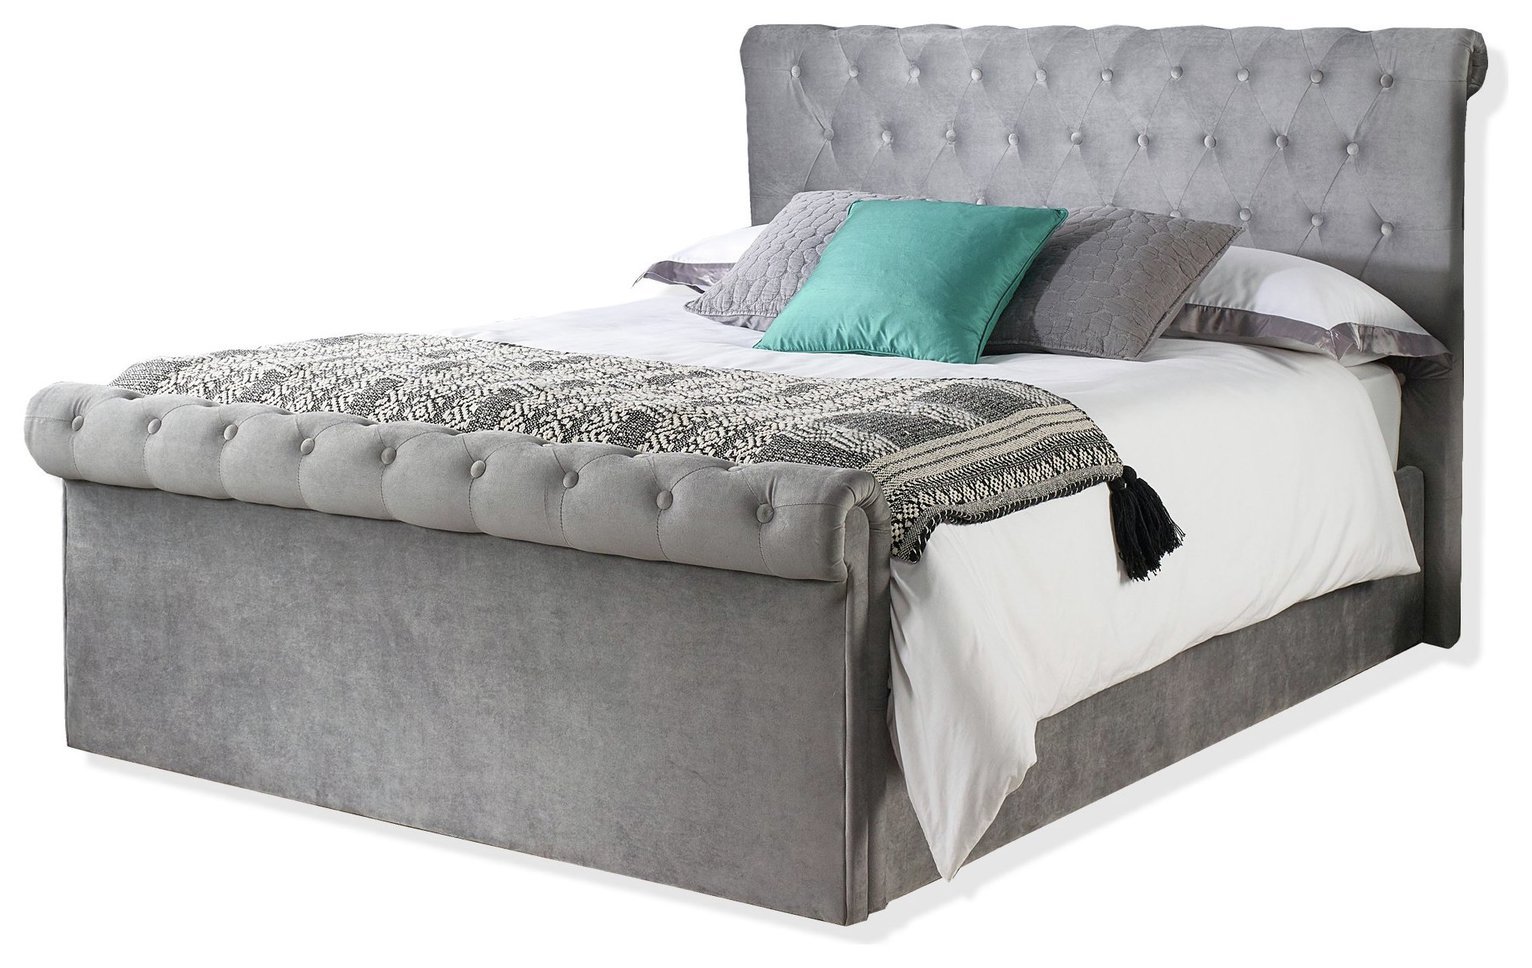 Aspire Chesterfield Superking Ottoman Bed Frame - Grey